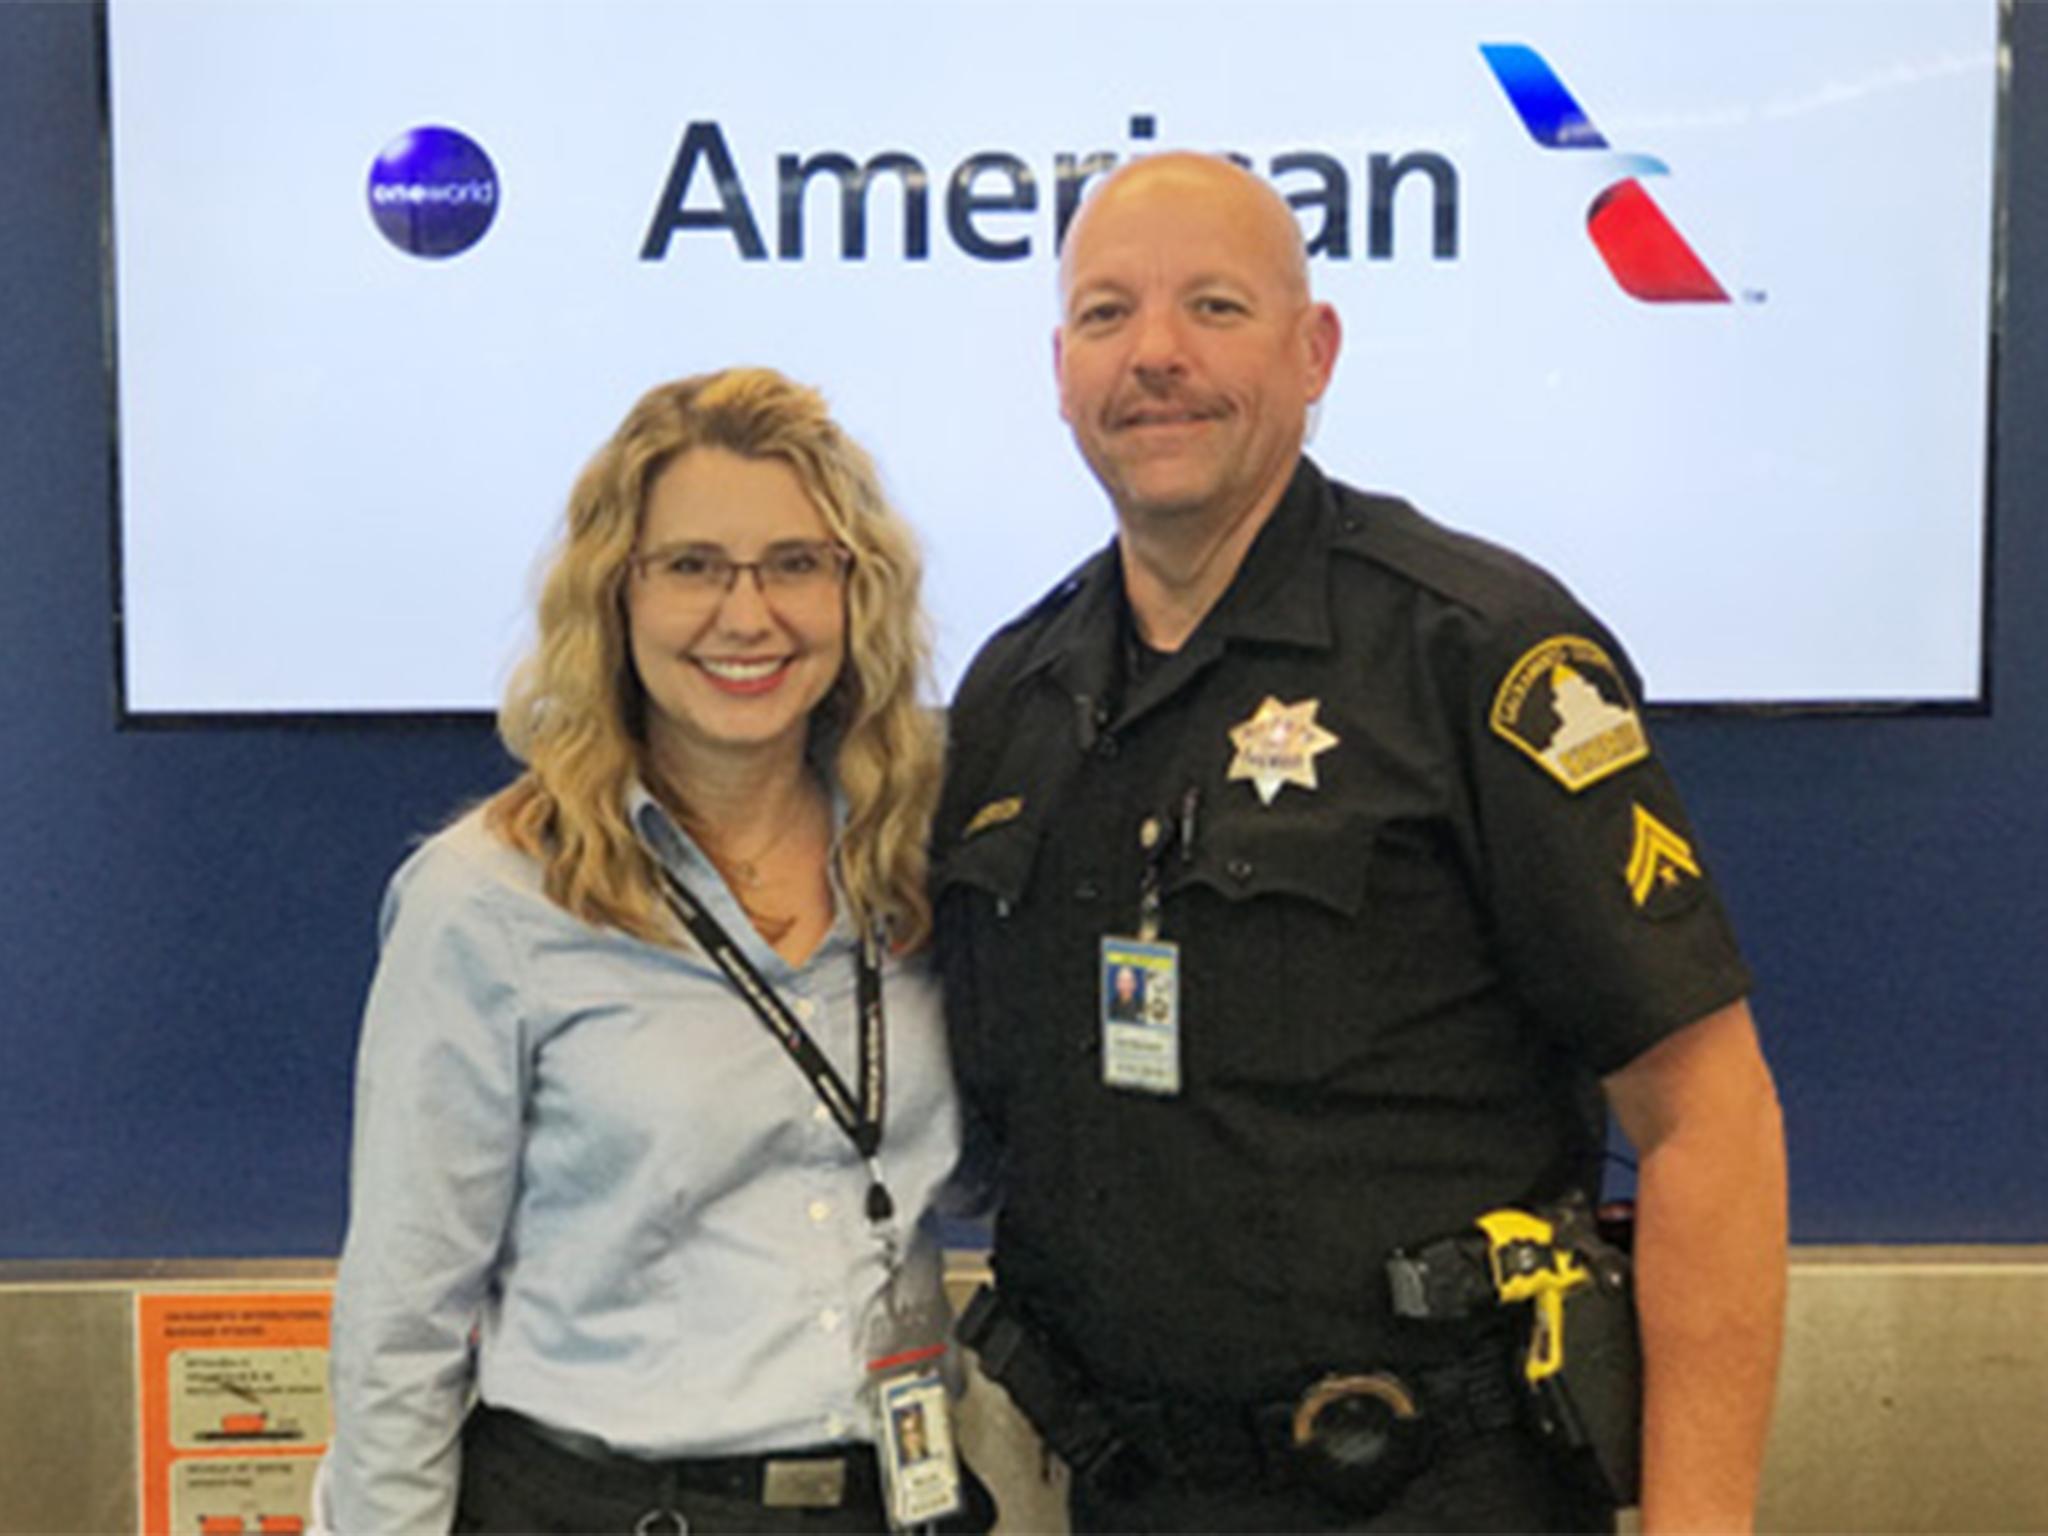 American Airlines agent Denice Miracle and Sheriff's Deputy Todd Sanderson